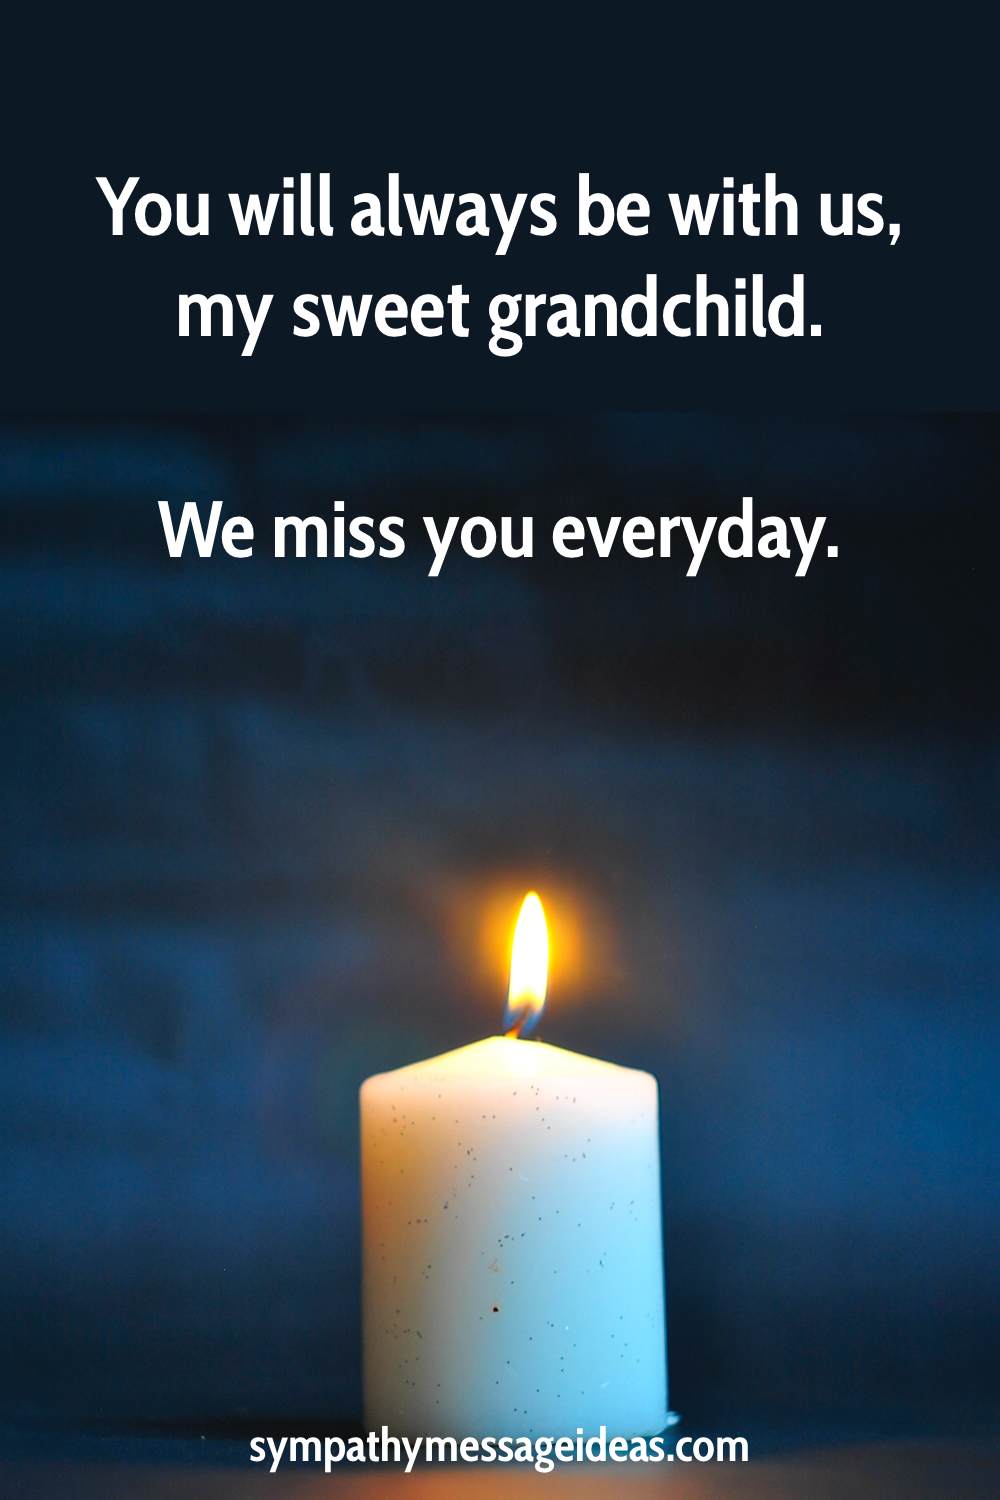 Sympathy Messages For The Loss Of A Granddaughter Sympathy Message Ideas